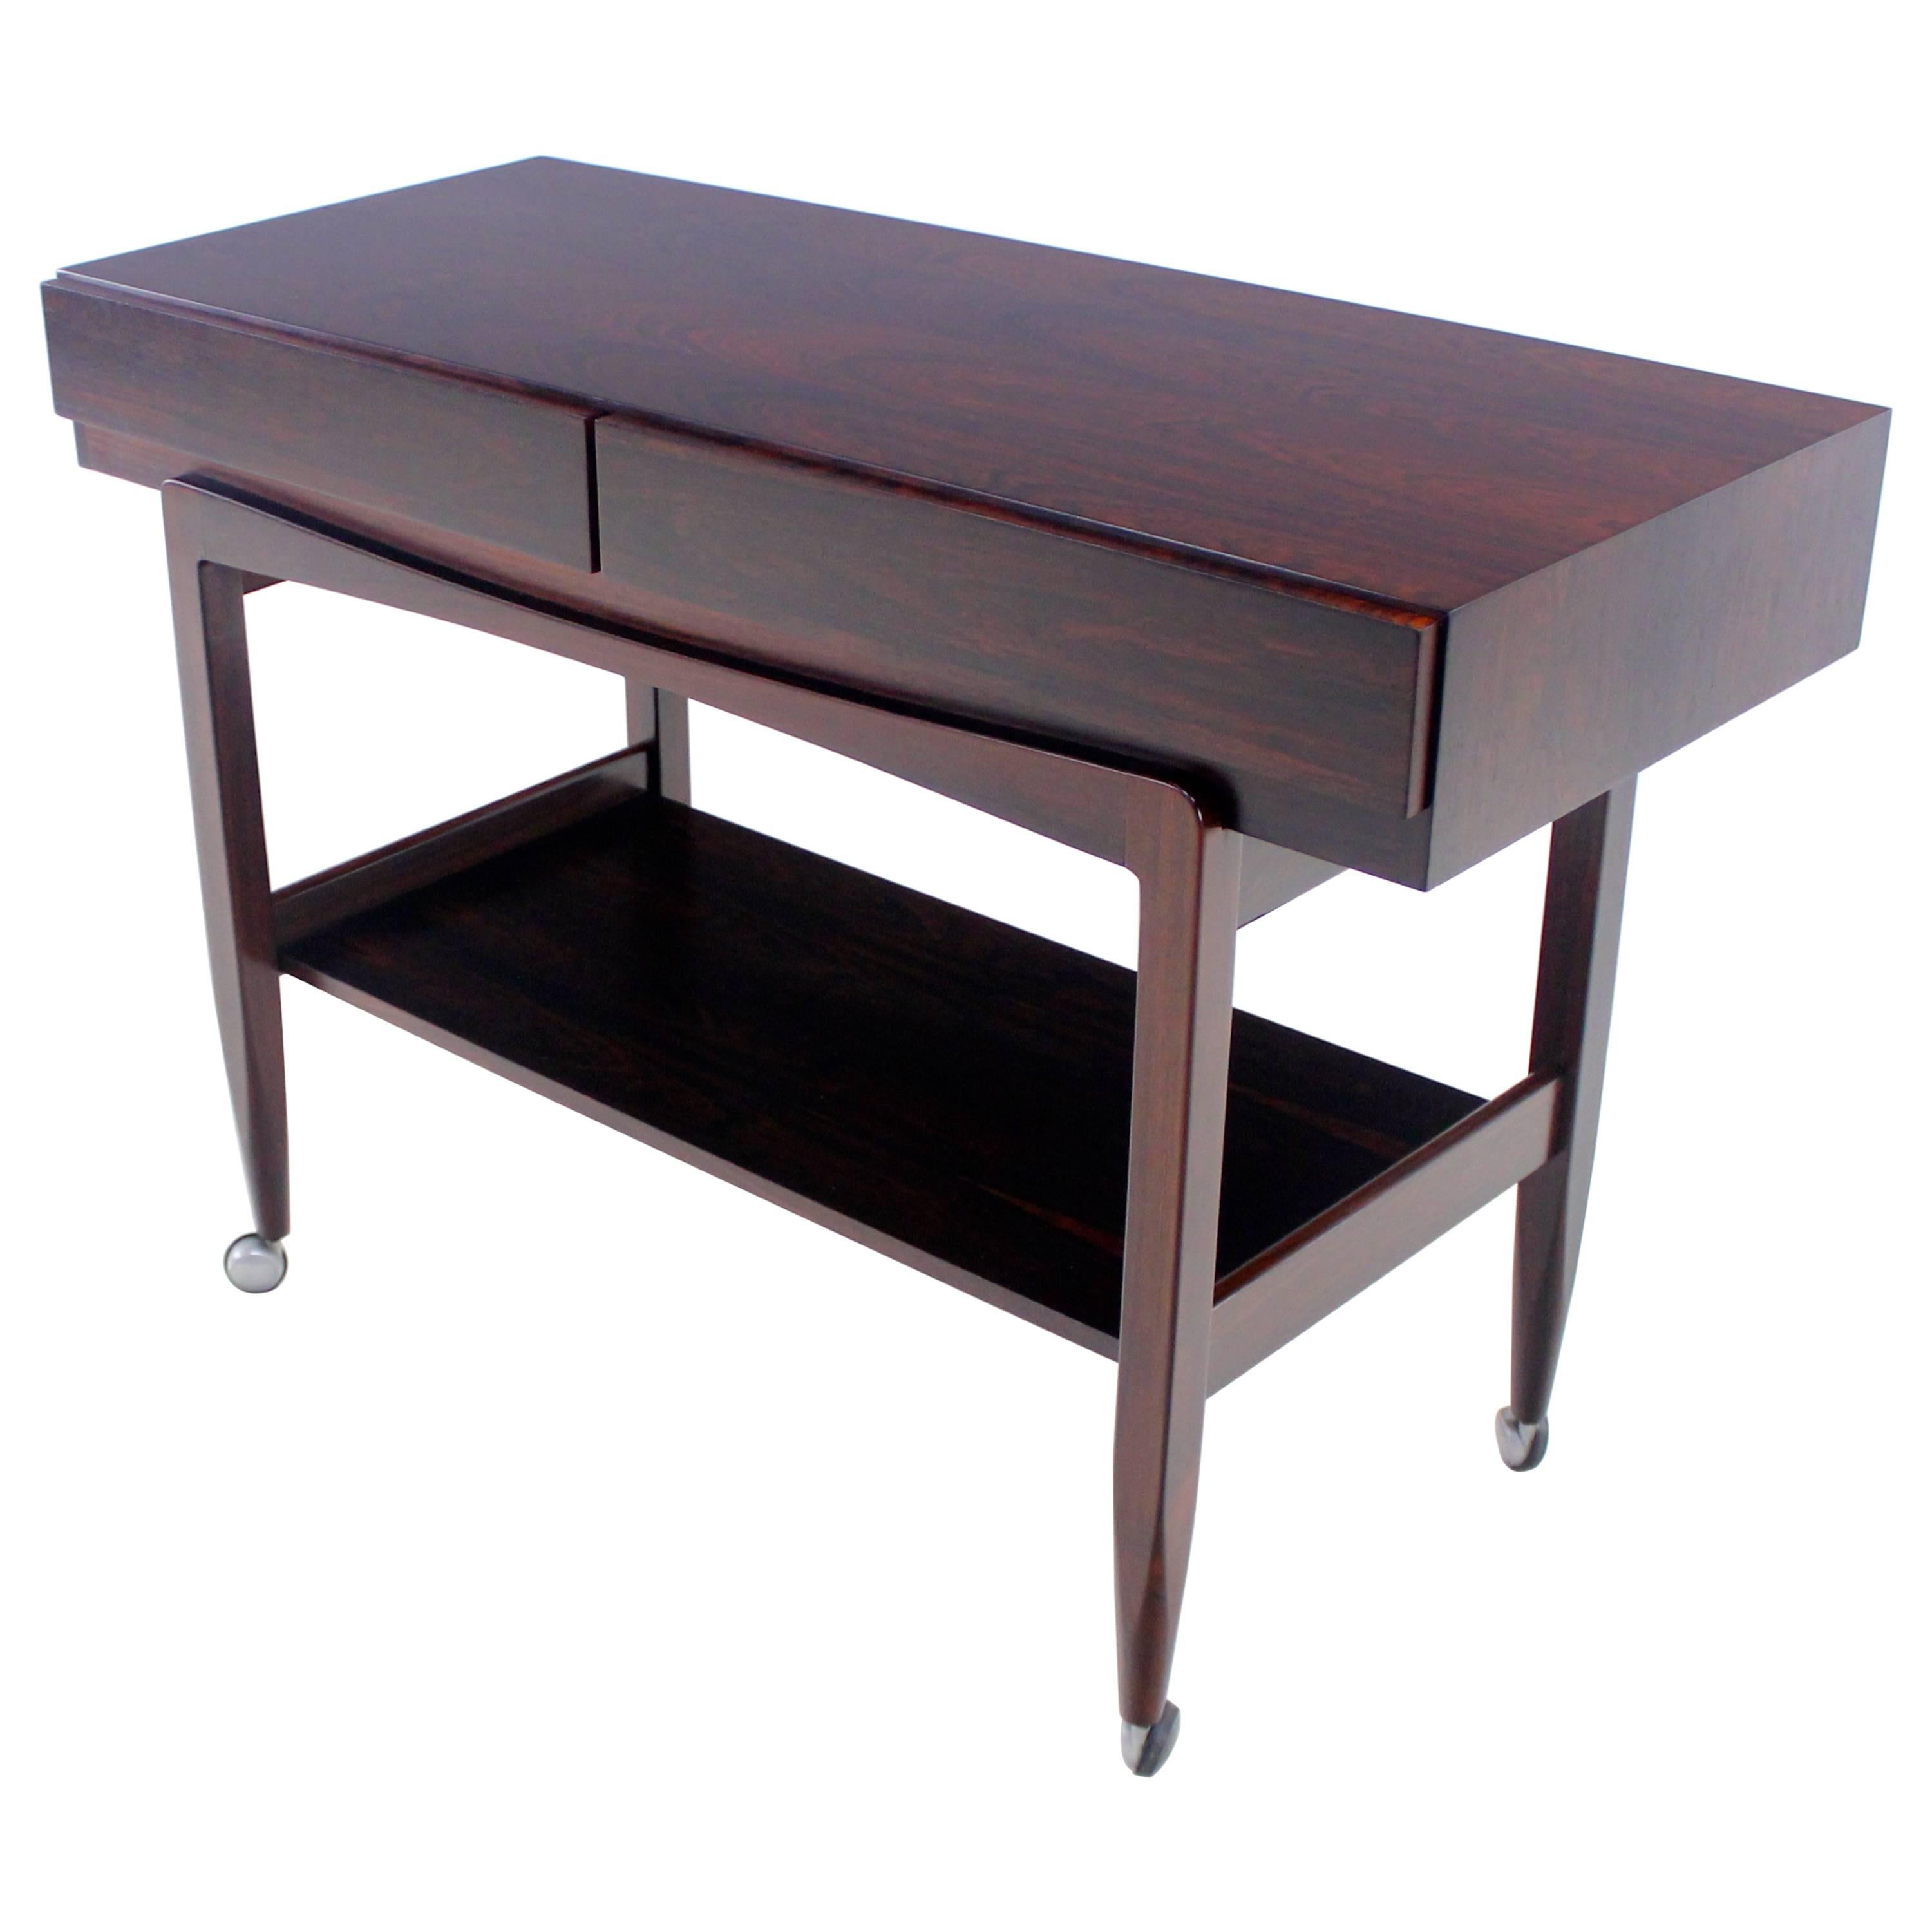 Rare Danish Modern Rosewood Console or Server Designed by Ib Kofod Larsen For Sale